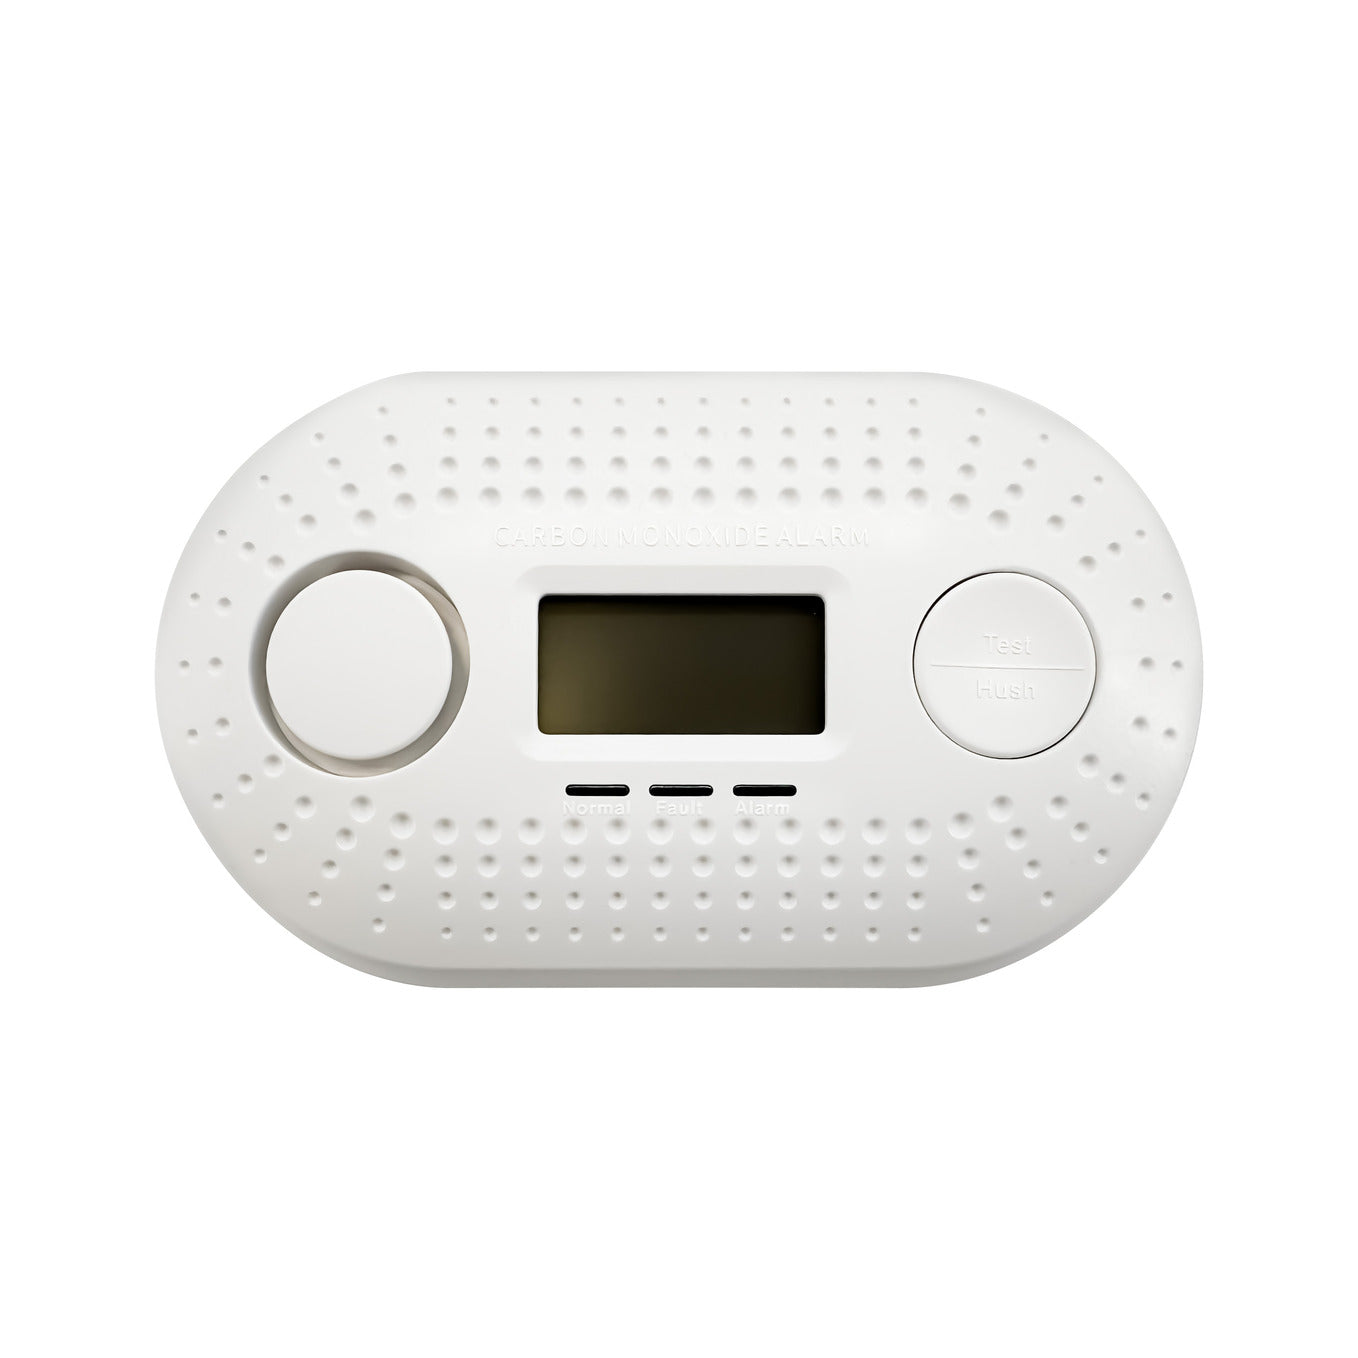 Firexo Interlinked Carbon Monoxide Alarm with 10 Year Tamper Proof Battery, can be interlinked with Firexo Smoke Alarm and Firexo Heat Alarm (sold separately), CO alarm, White